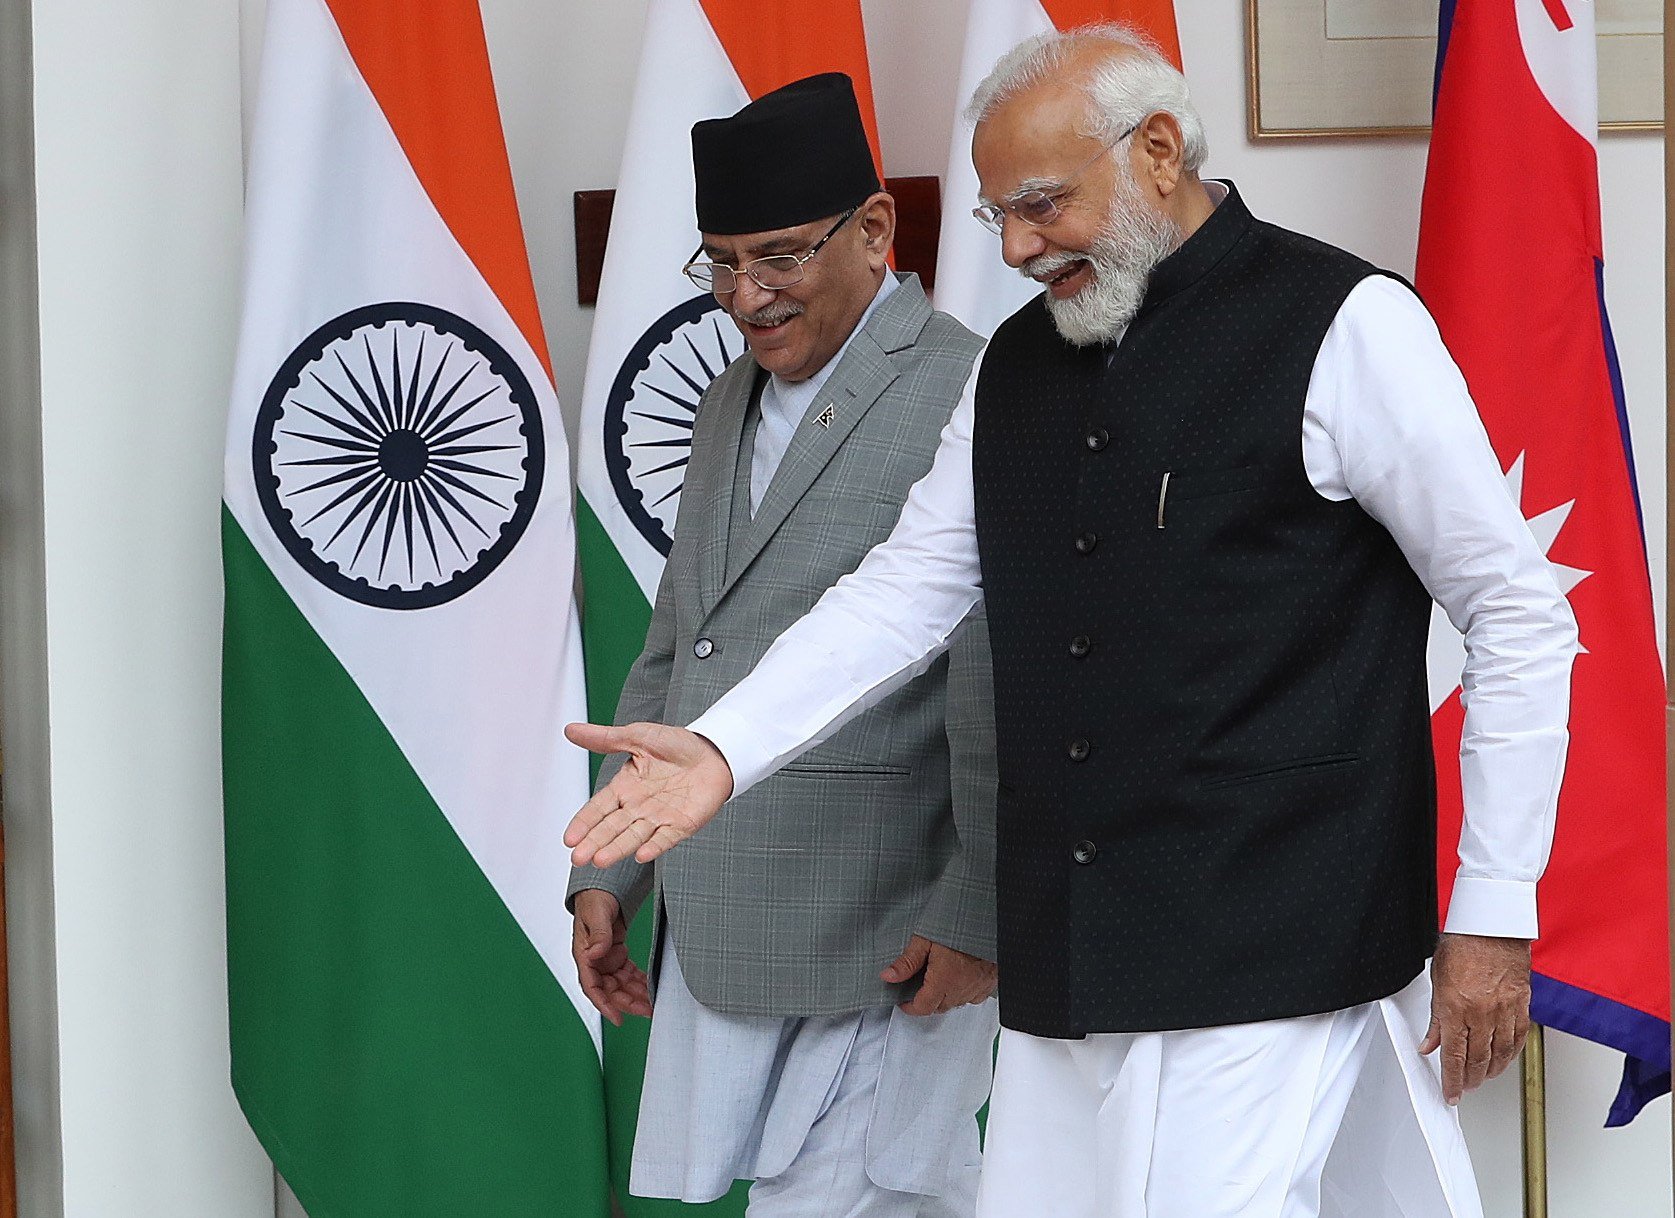 Nepal’s Prime Minister Pushpa Kamal Dahal (left) chats with Indian Prime Minister Narendra Modi prior to their meeting at Hyderabad House, in New Delhi, India, on June 1, 2023. Photo: EPA-EFE